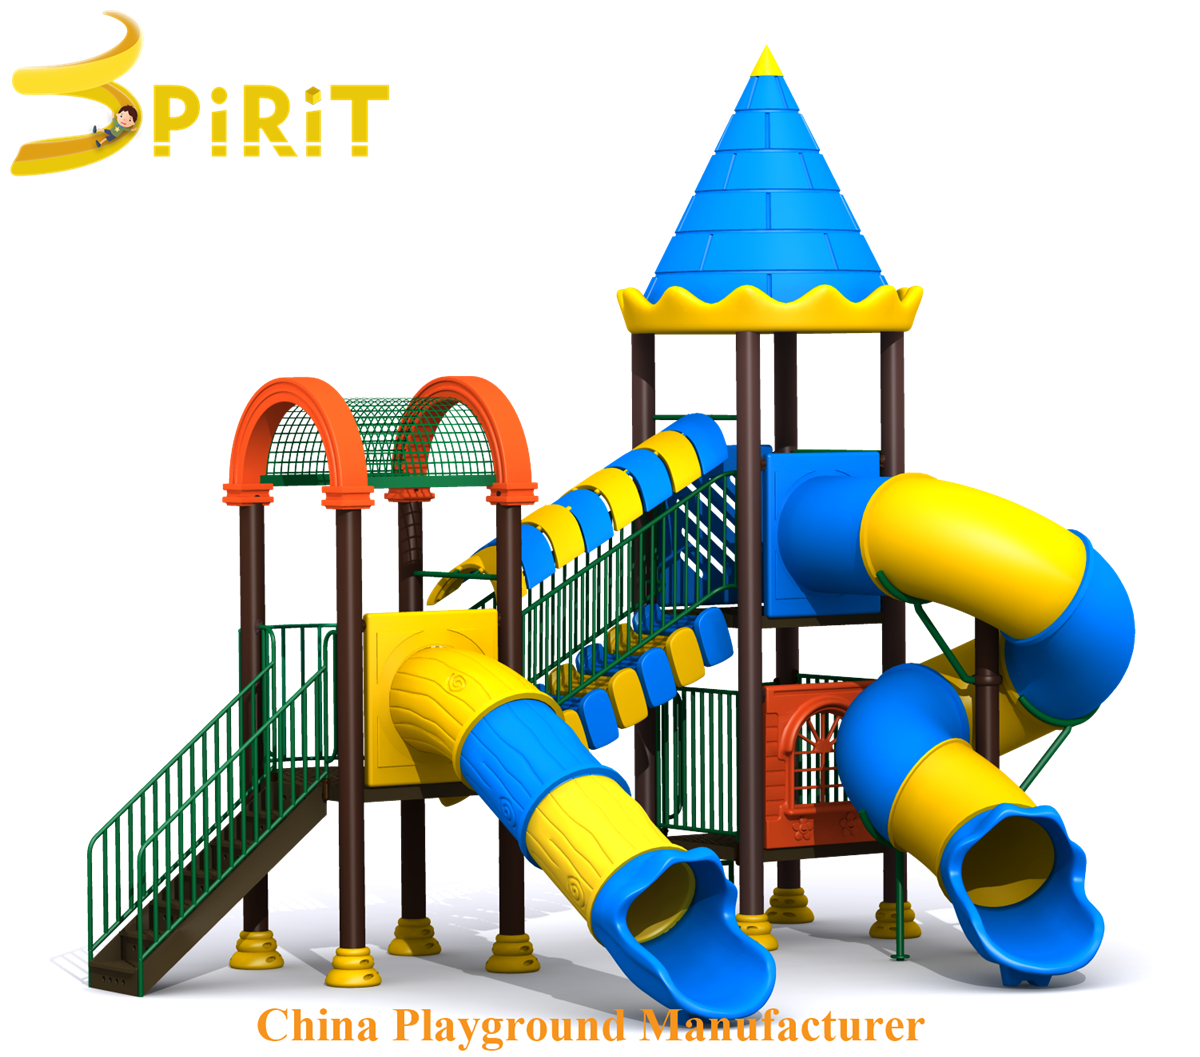 Kids school commercial cheapest Themed Structures Manufacturer CE-SPIRIT PLAY,Outdoor Playground, Indoor Playground,Trampoline Park,Outdoor Fitness,Inflatable,Soft Playground,Ninja Warrior,Trampoline Park,Playground Structure,Play Structure,Outdoor Fitness,Water Park,Play System,Freestanding,Interactive,independente ,Inklusibo, Park, Pagsaka sa Bungbong, Dula sa Bata